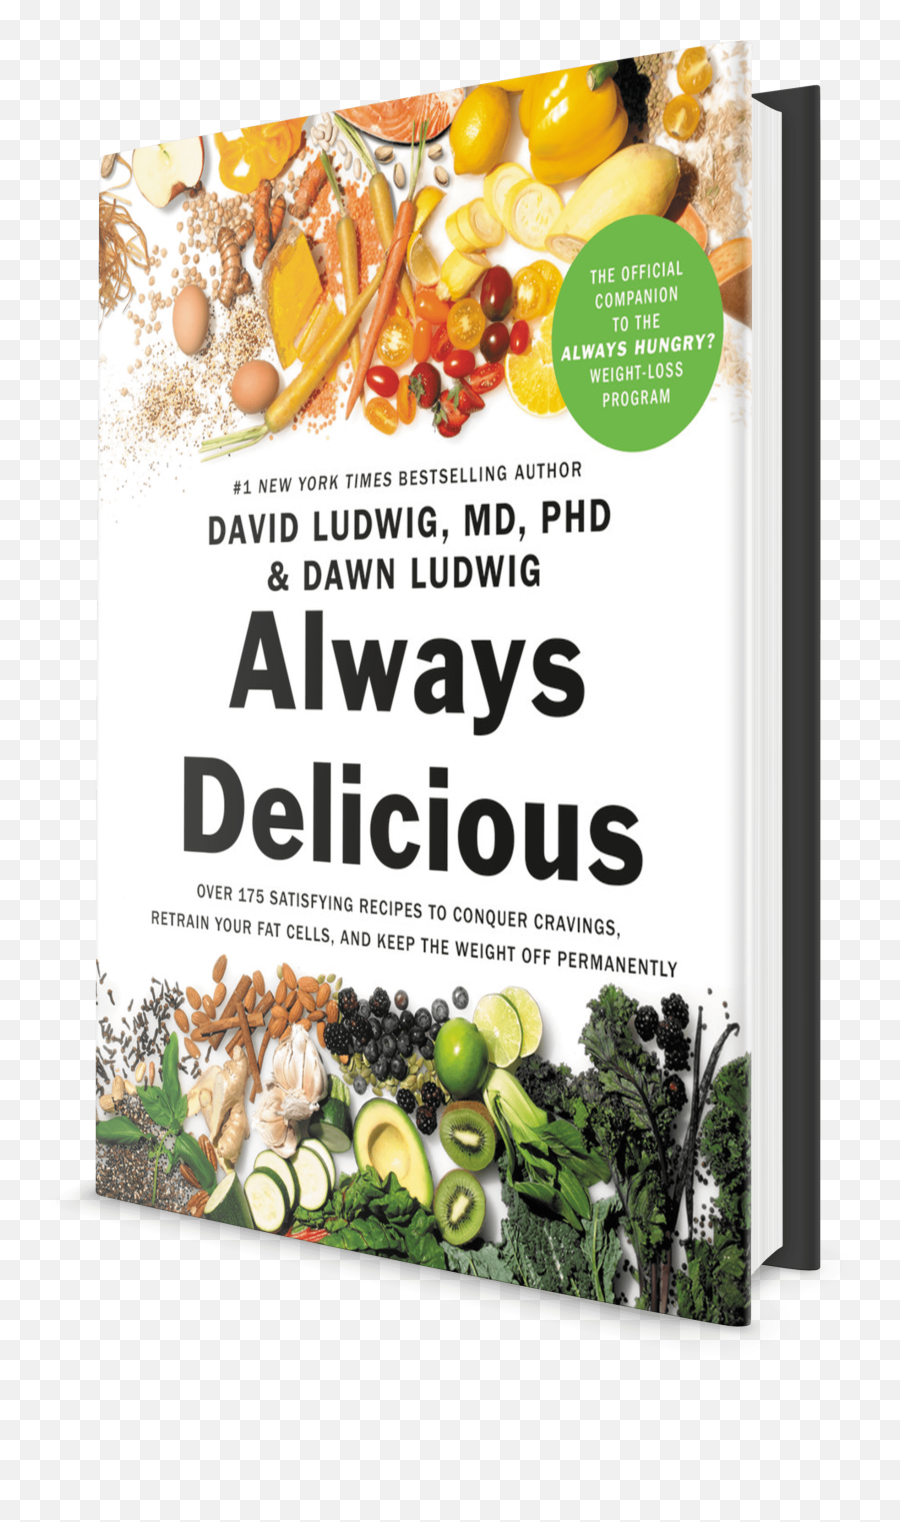 Books By Dr David Ludwig And Chef Dawn Ludwig Emoji,Stir It Up The Novel Feeling Recipe Pages Emotion